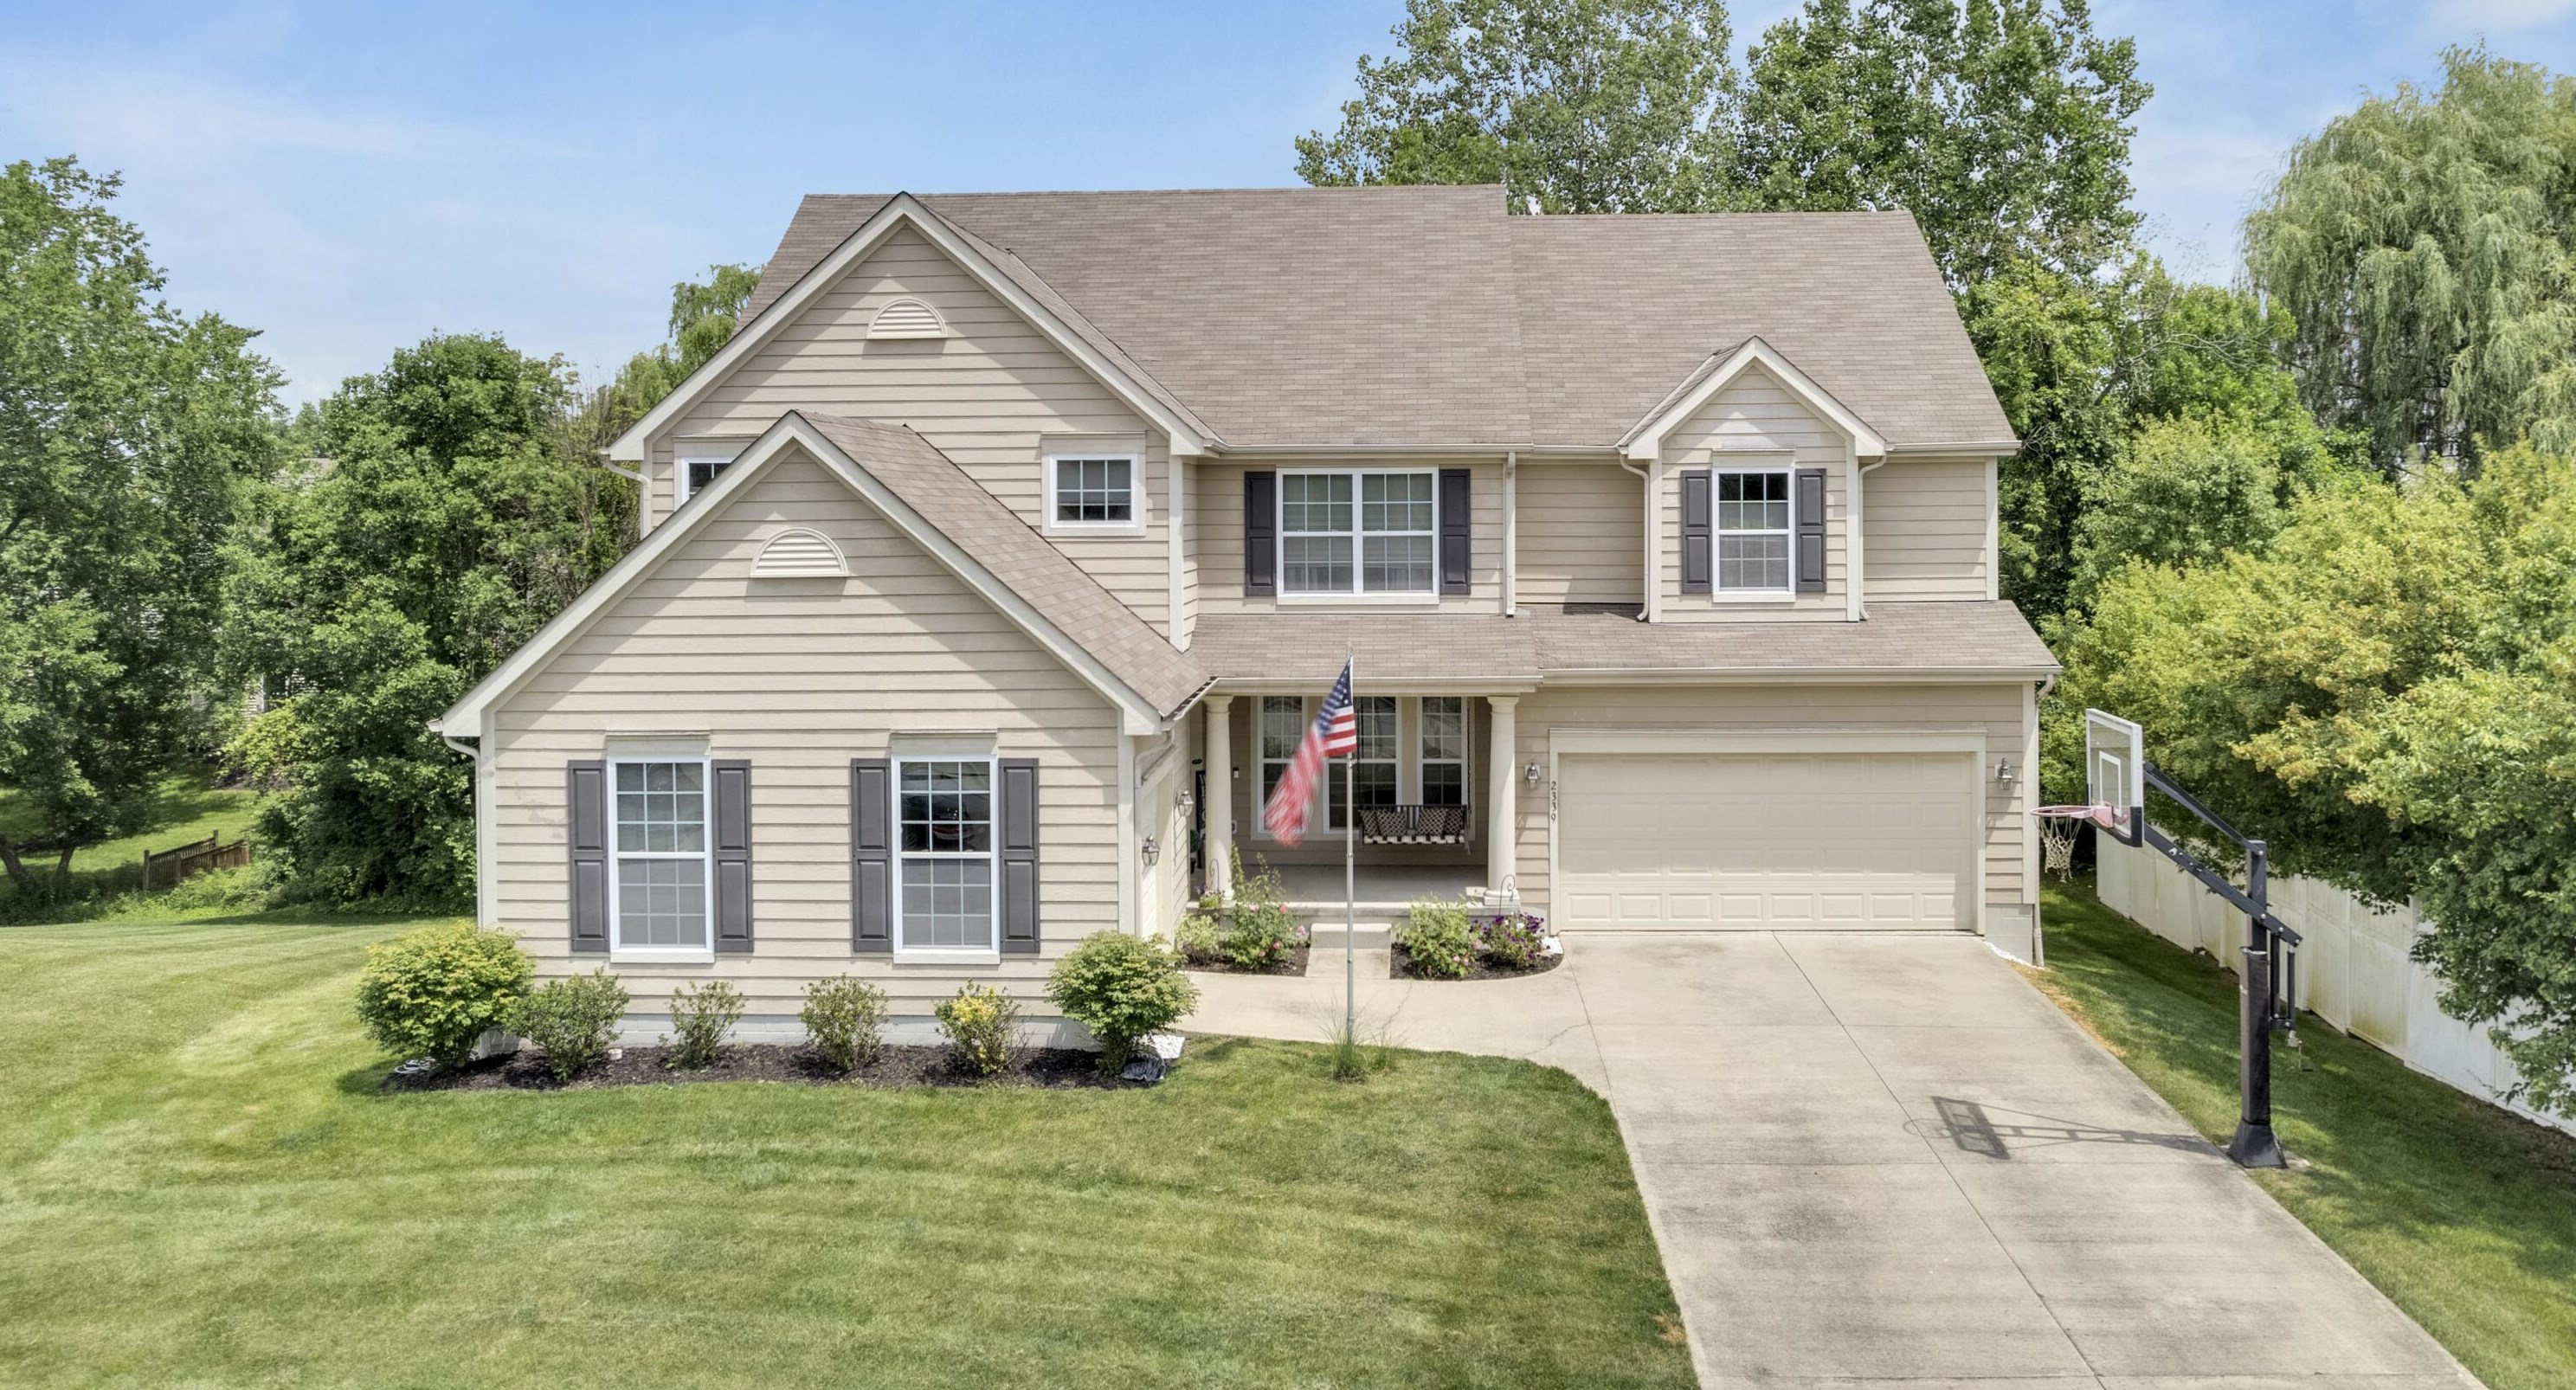 2339 Charoe St, Lewis Center, OH 43035